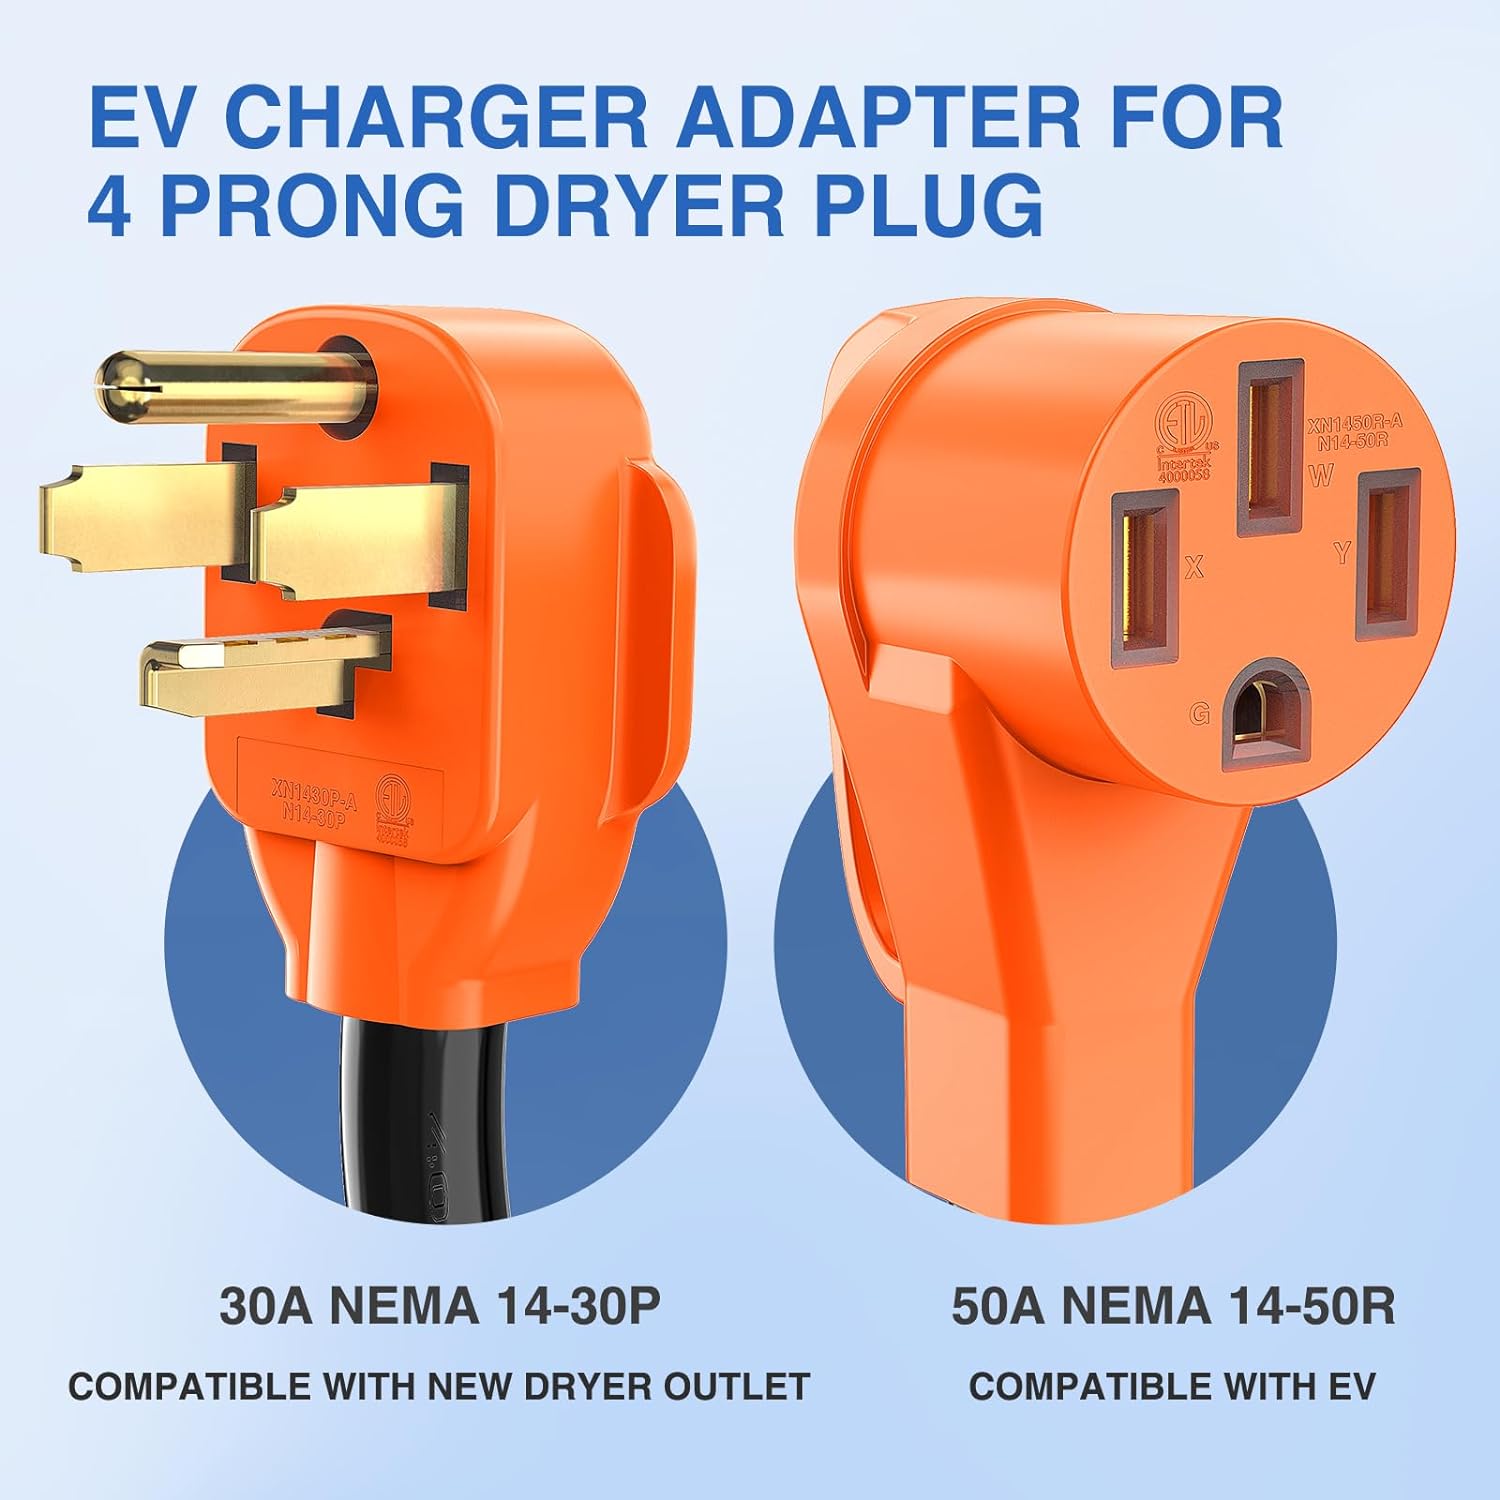 RV Parts EV Charger Adapter Cord 30 Amp to 50 Amp 4 Prong Pure Copper New Dryer Outlet to EV Plug Conversion Heavy Duty 10 Gauge Wire 14-30P to 14-50R 30M/50F for Level 2 EV Charging